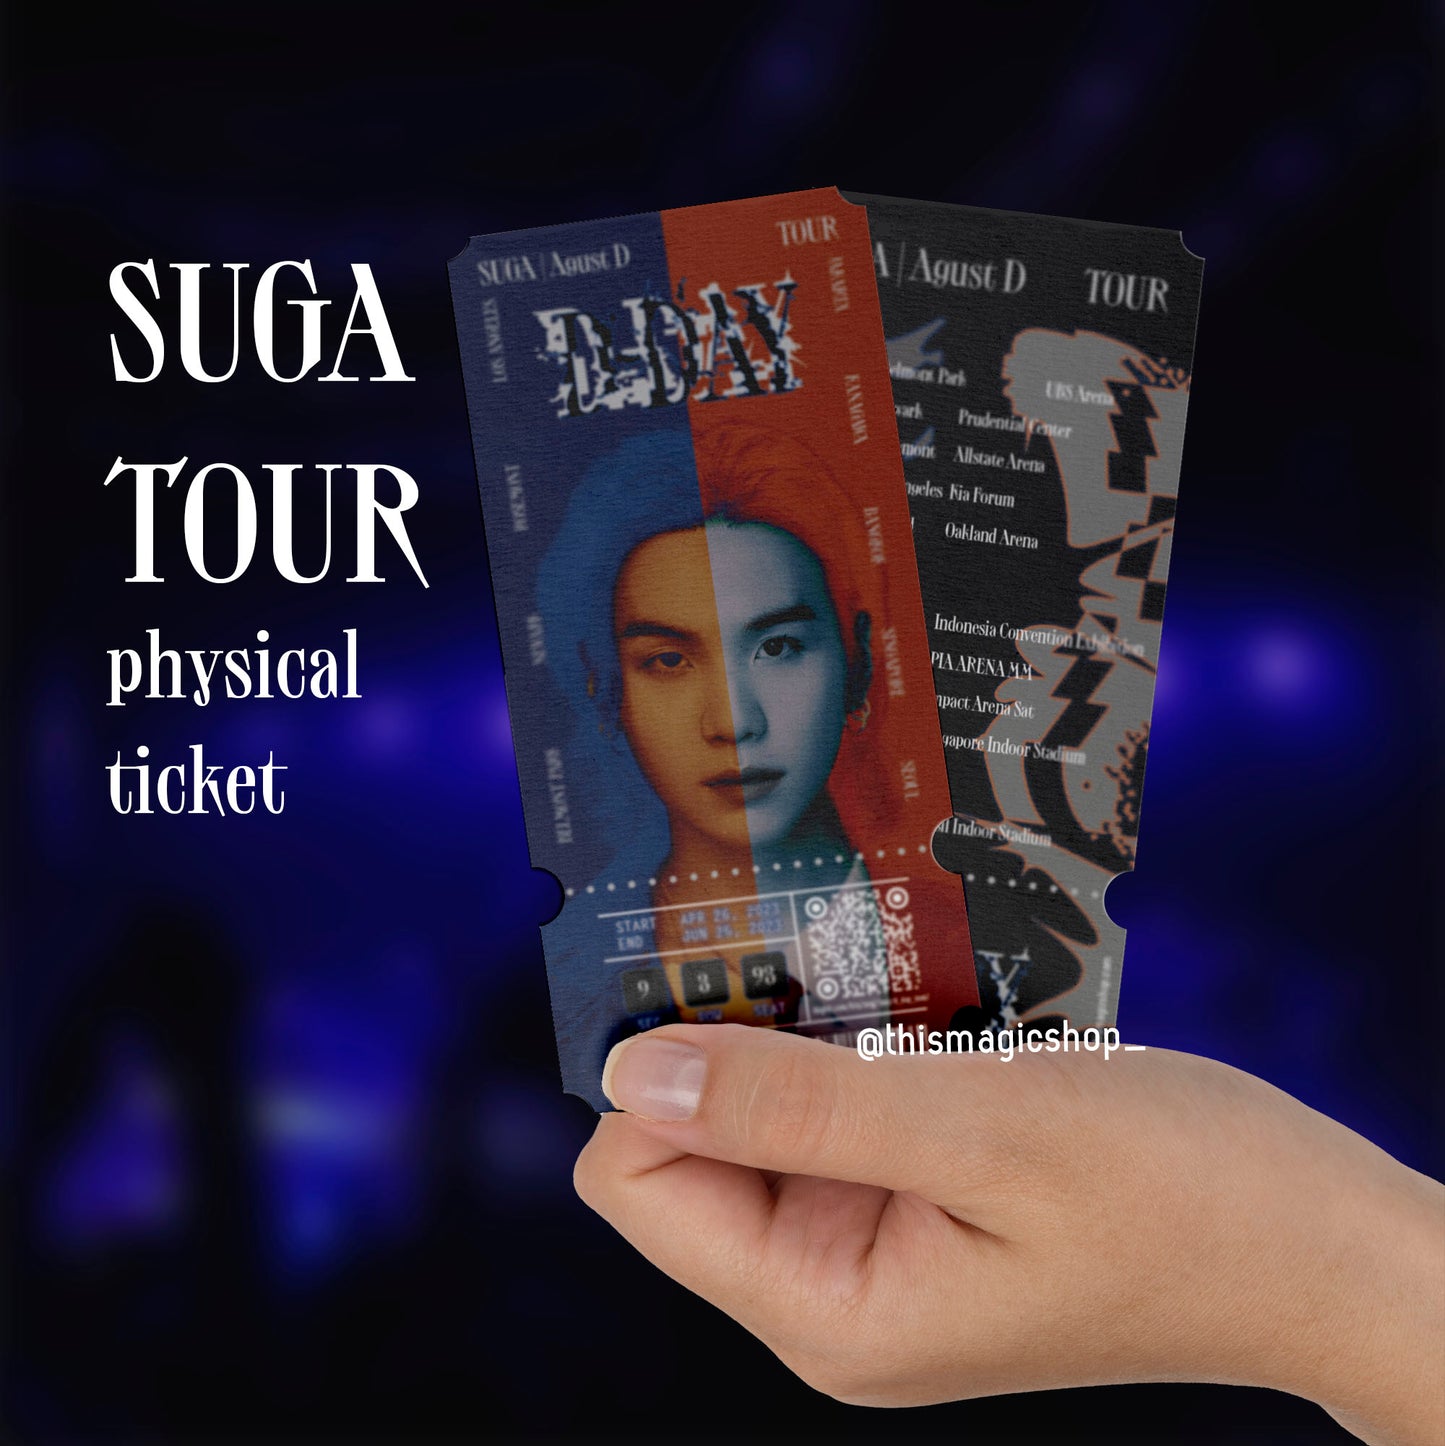 SUGA | AGUST D D-DAY Tour TICKET commemorative ticket